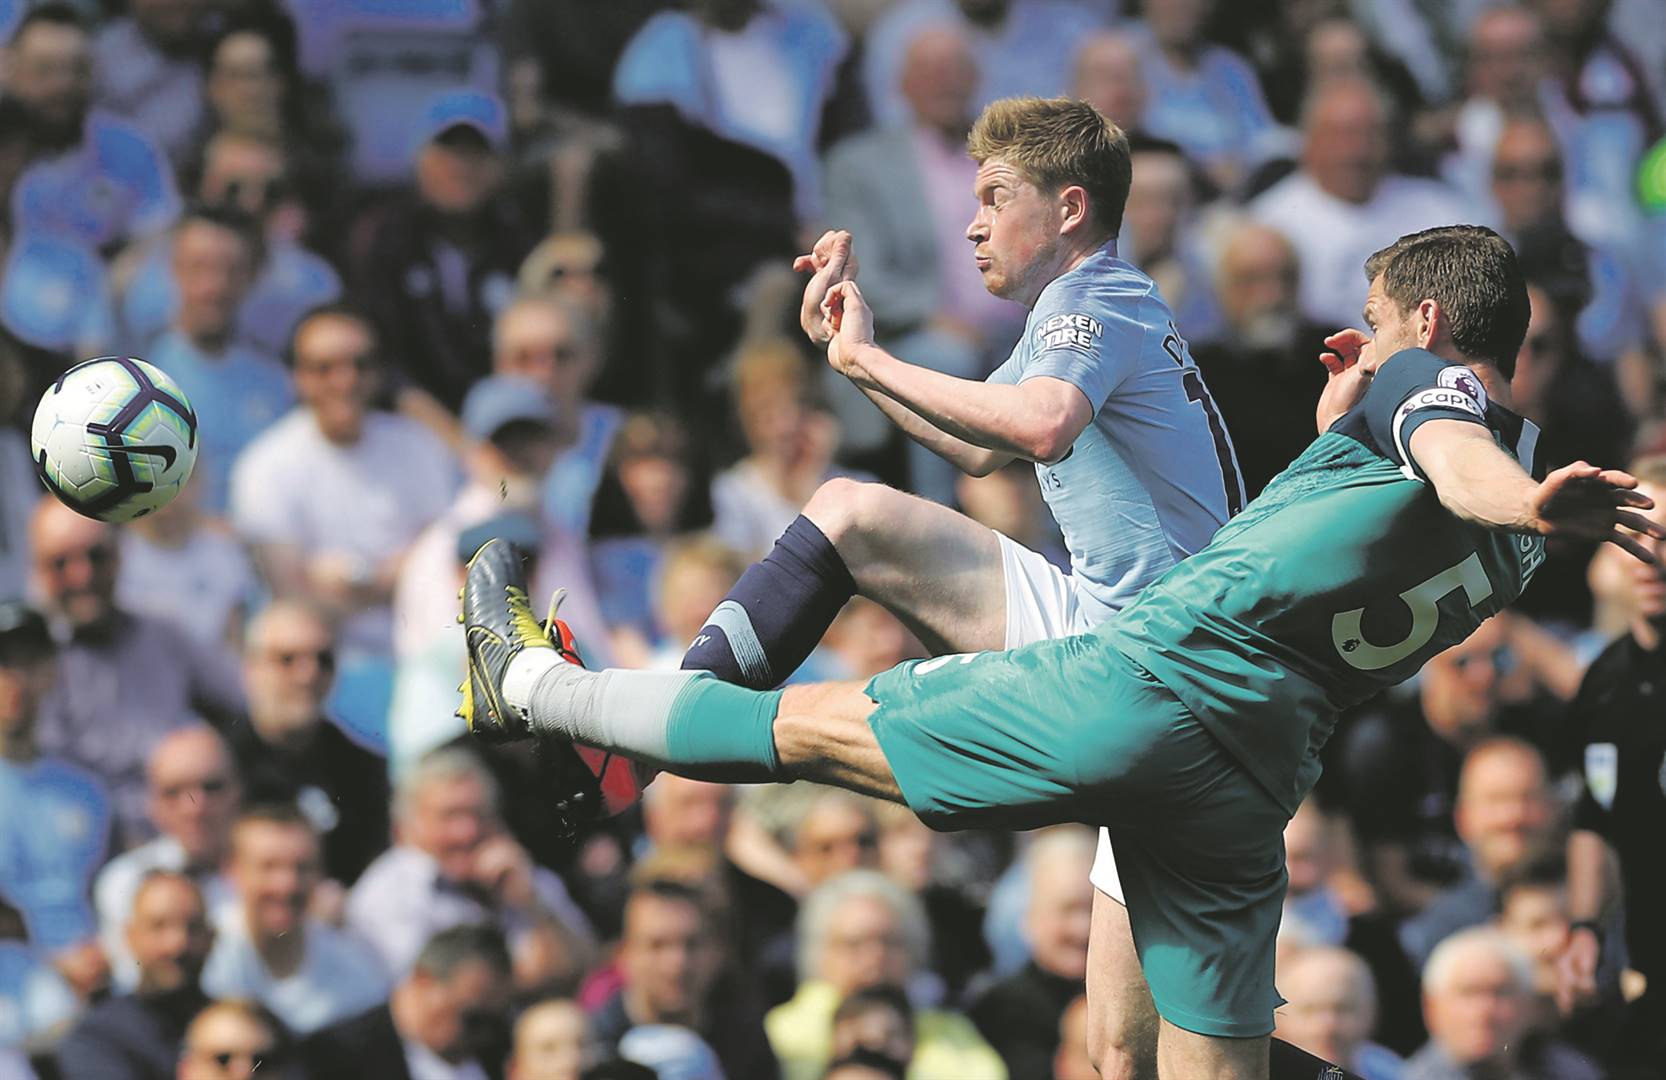 ALIVE AND KICKING Kevin de Bruyne of Manchester City and Tottenham’s Jan Vertonghen fight for the ball in yesterday’s Premier League match. Picture: Phil Noble / REUTERS